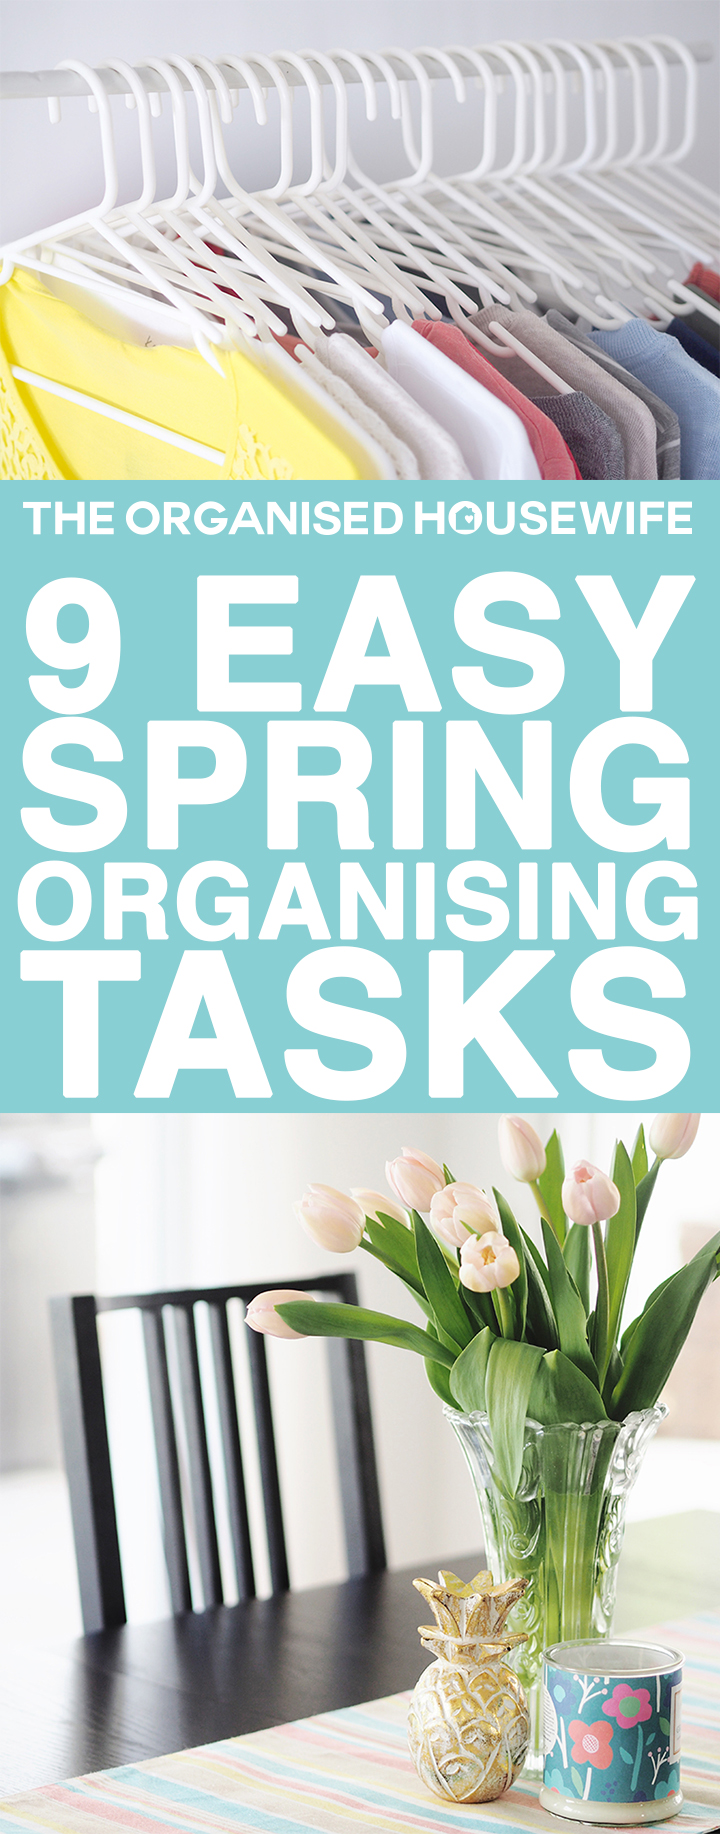 Change of season is a great time of year to not only clean but also sort through cupboards and start planning for the busy months ahead. I’ve put together a list of some easy organising tasks that will help you to reduce clutter and help organise your home.